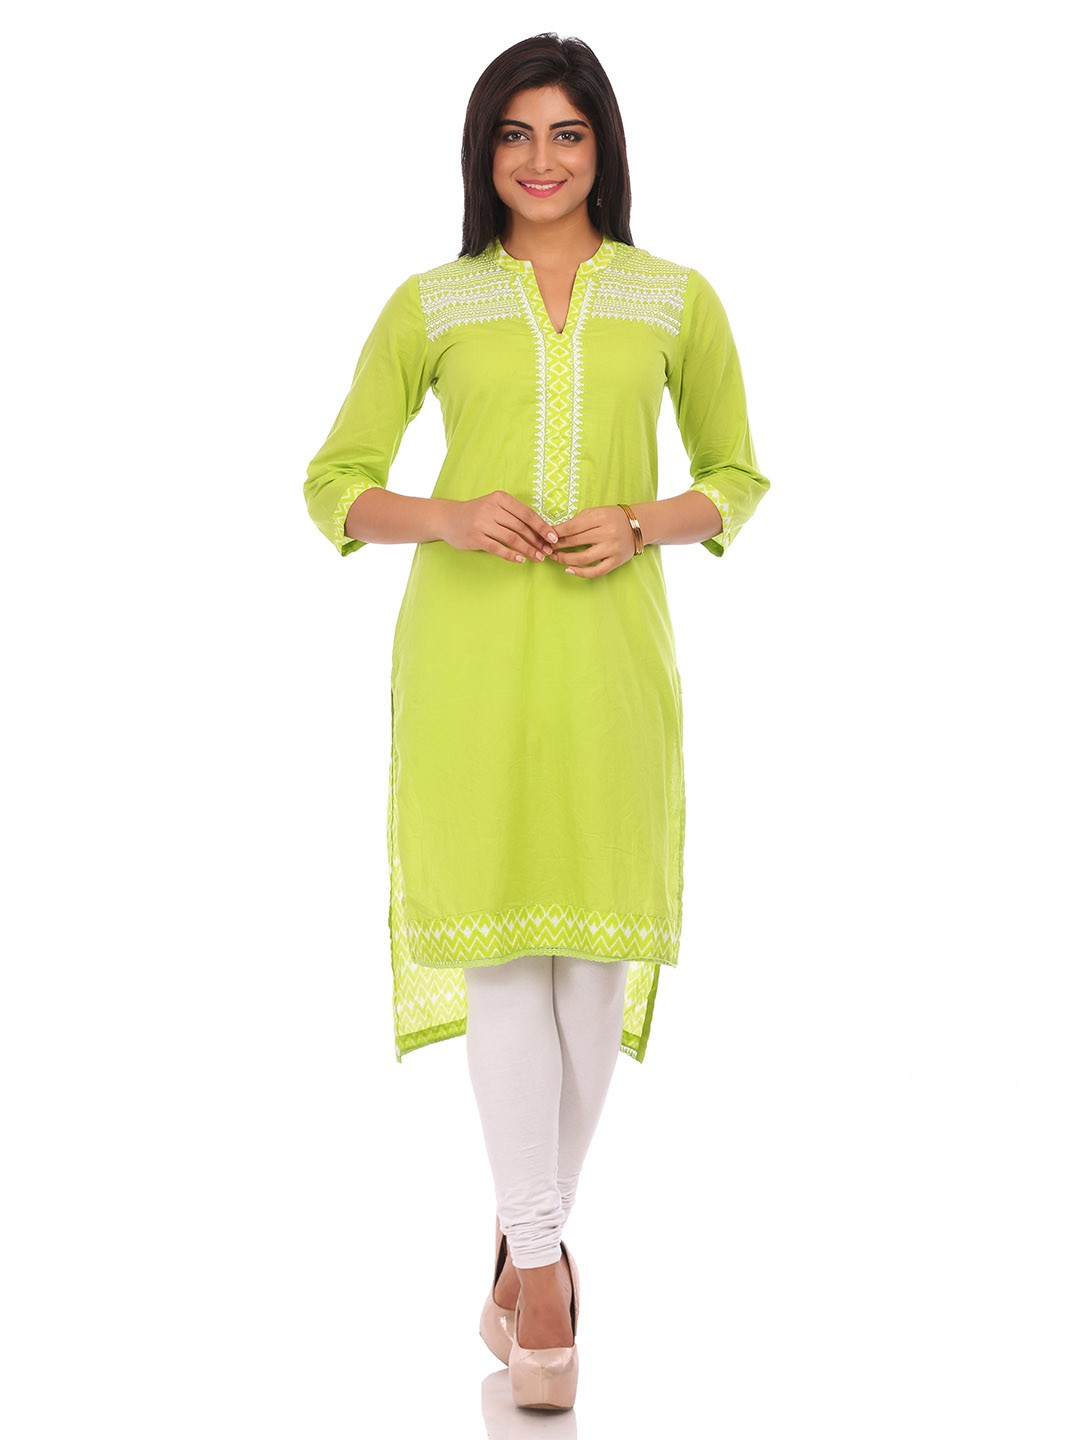 Top 15 best kurti brands to try | Most popular kurtis brands in India